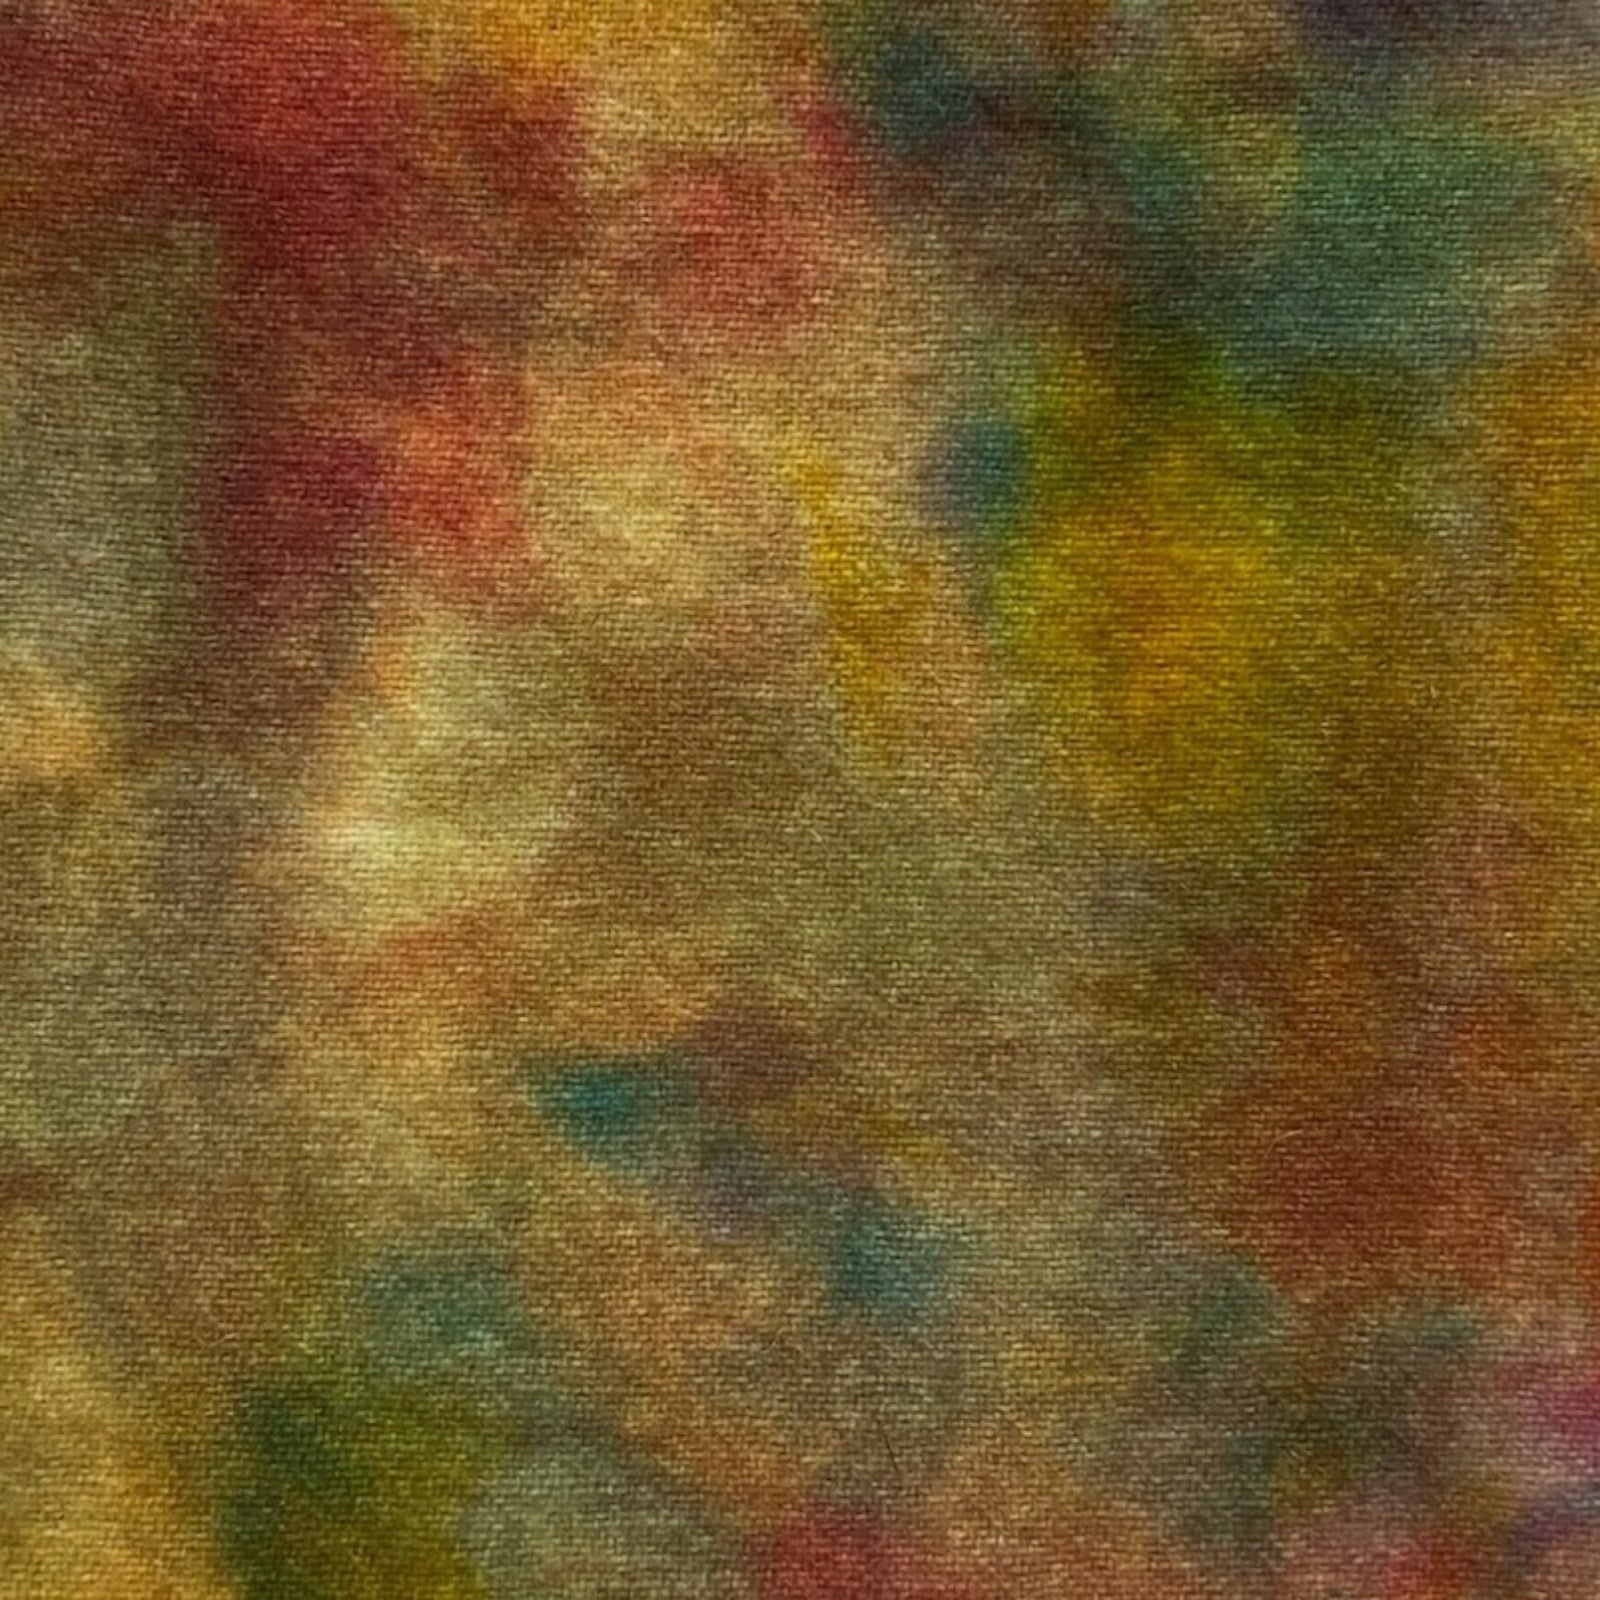 Crystal - Colorama Hand Dyed Wool - Offered by HoneyBee Hive Rug Hooking